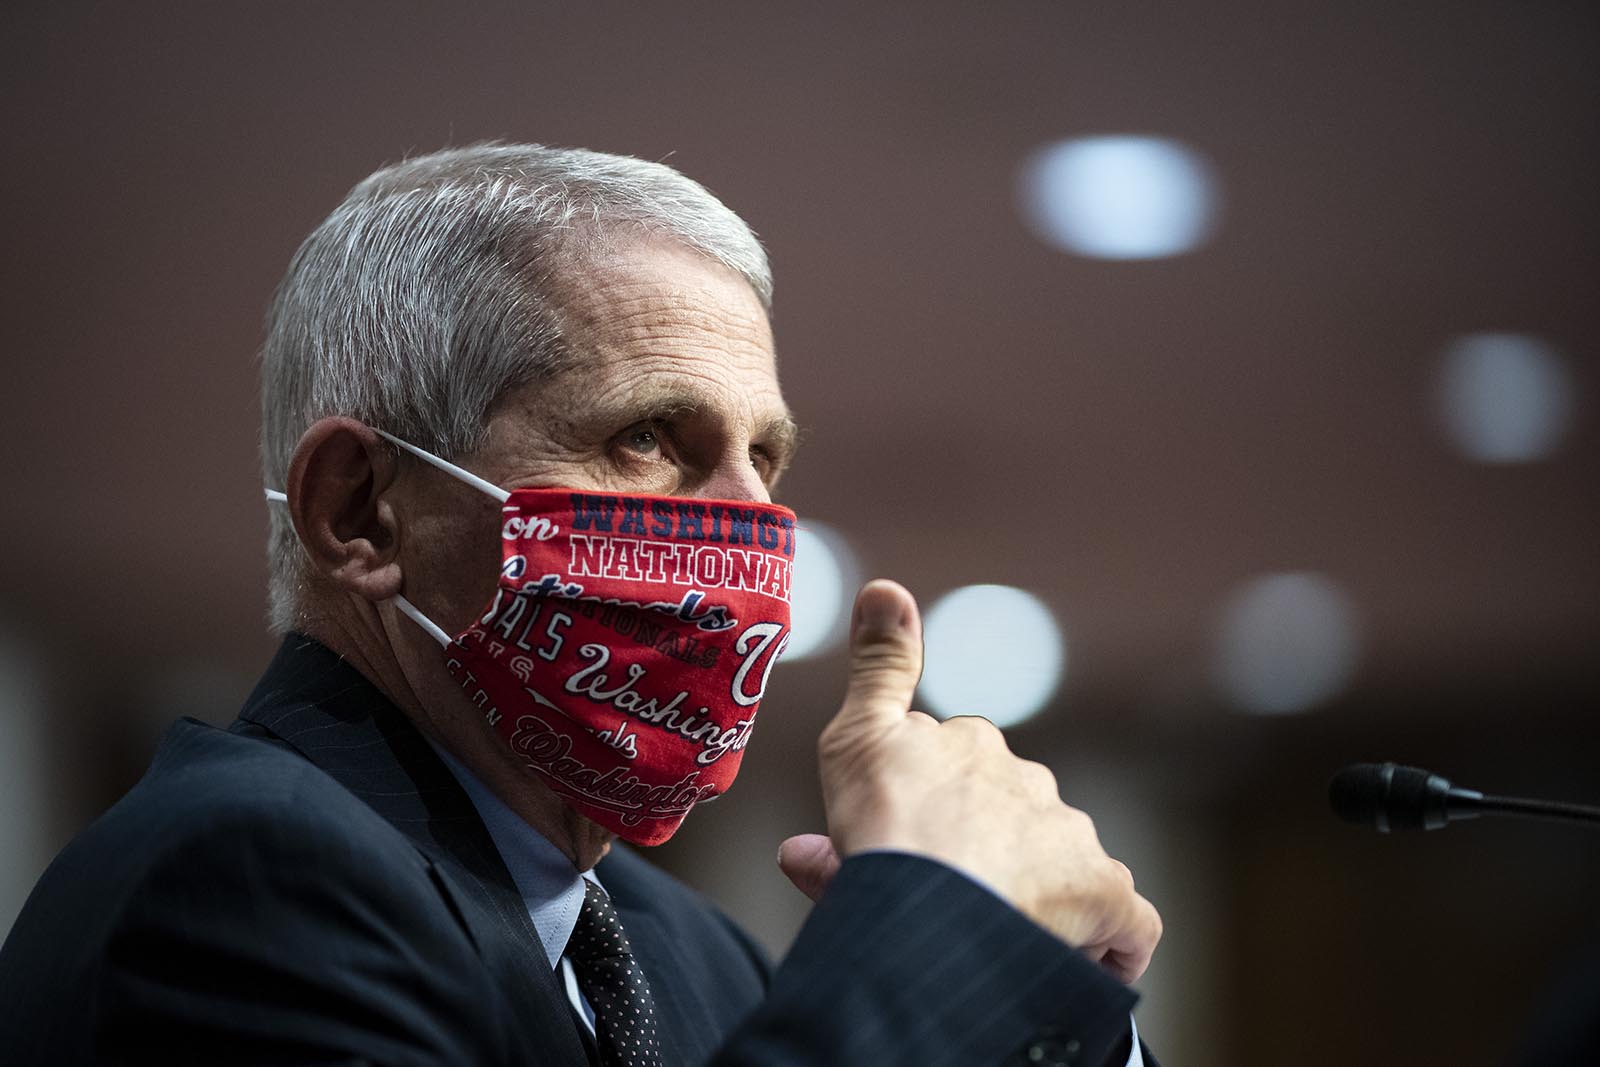 Dr. Anthony Fauci gives a thumbs up during a Senate Health, Education, Labor and Pensions Committee hearing on June 30 in Washington